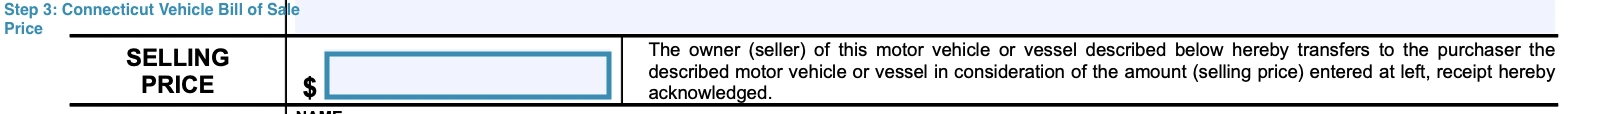 Part for specifying information about payment amount of Connecticut car bill of sale form